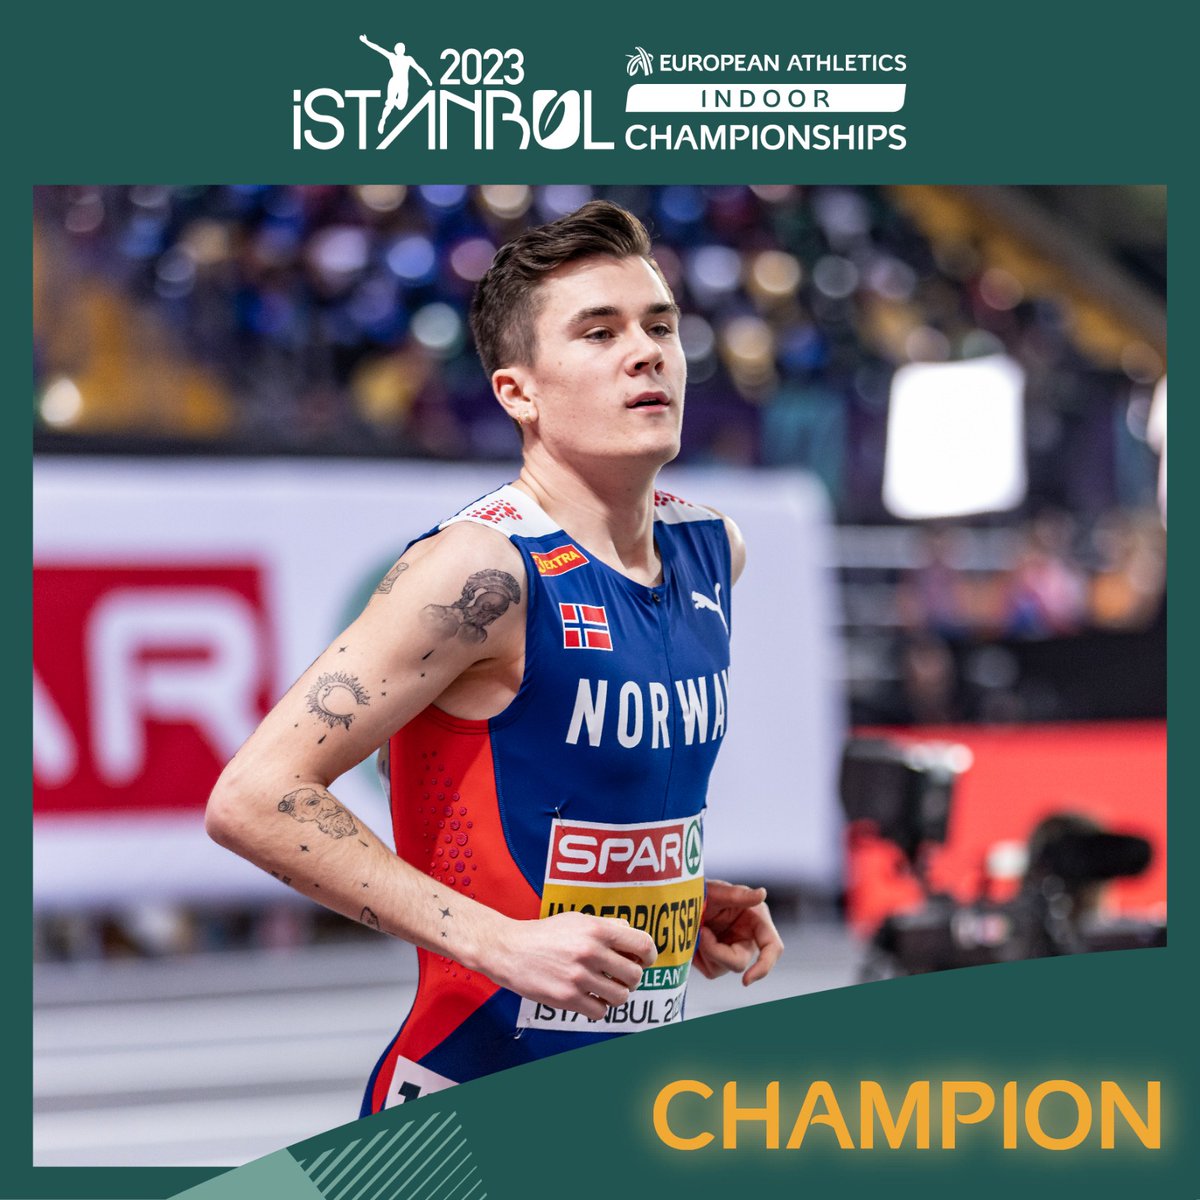 ✌️🇳🇴✌️1500m and 3000m titles defended perfectly by Jakob Ingebrigtsen as his 3000m final of a 7:40.32 performance erupted the crowd in Istanbul. 🥈Adel Mechaal (7.41.75) 🇪🇸 🥉Elzan Bibic (7:44.03) 🇷🇸 #EICH2023 #Istanbul2023 #Istanbul #EuroIndoor #protectnature #athletics